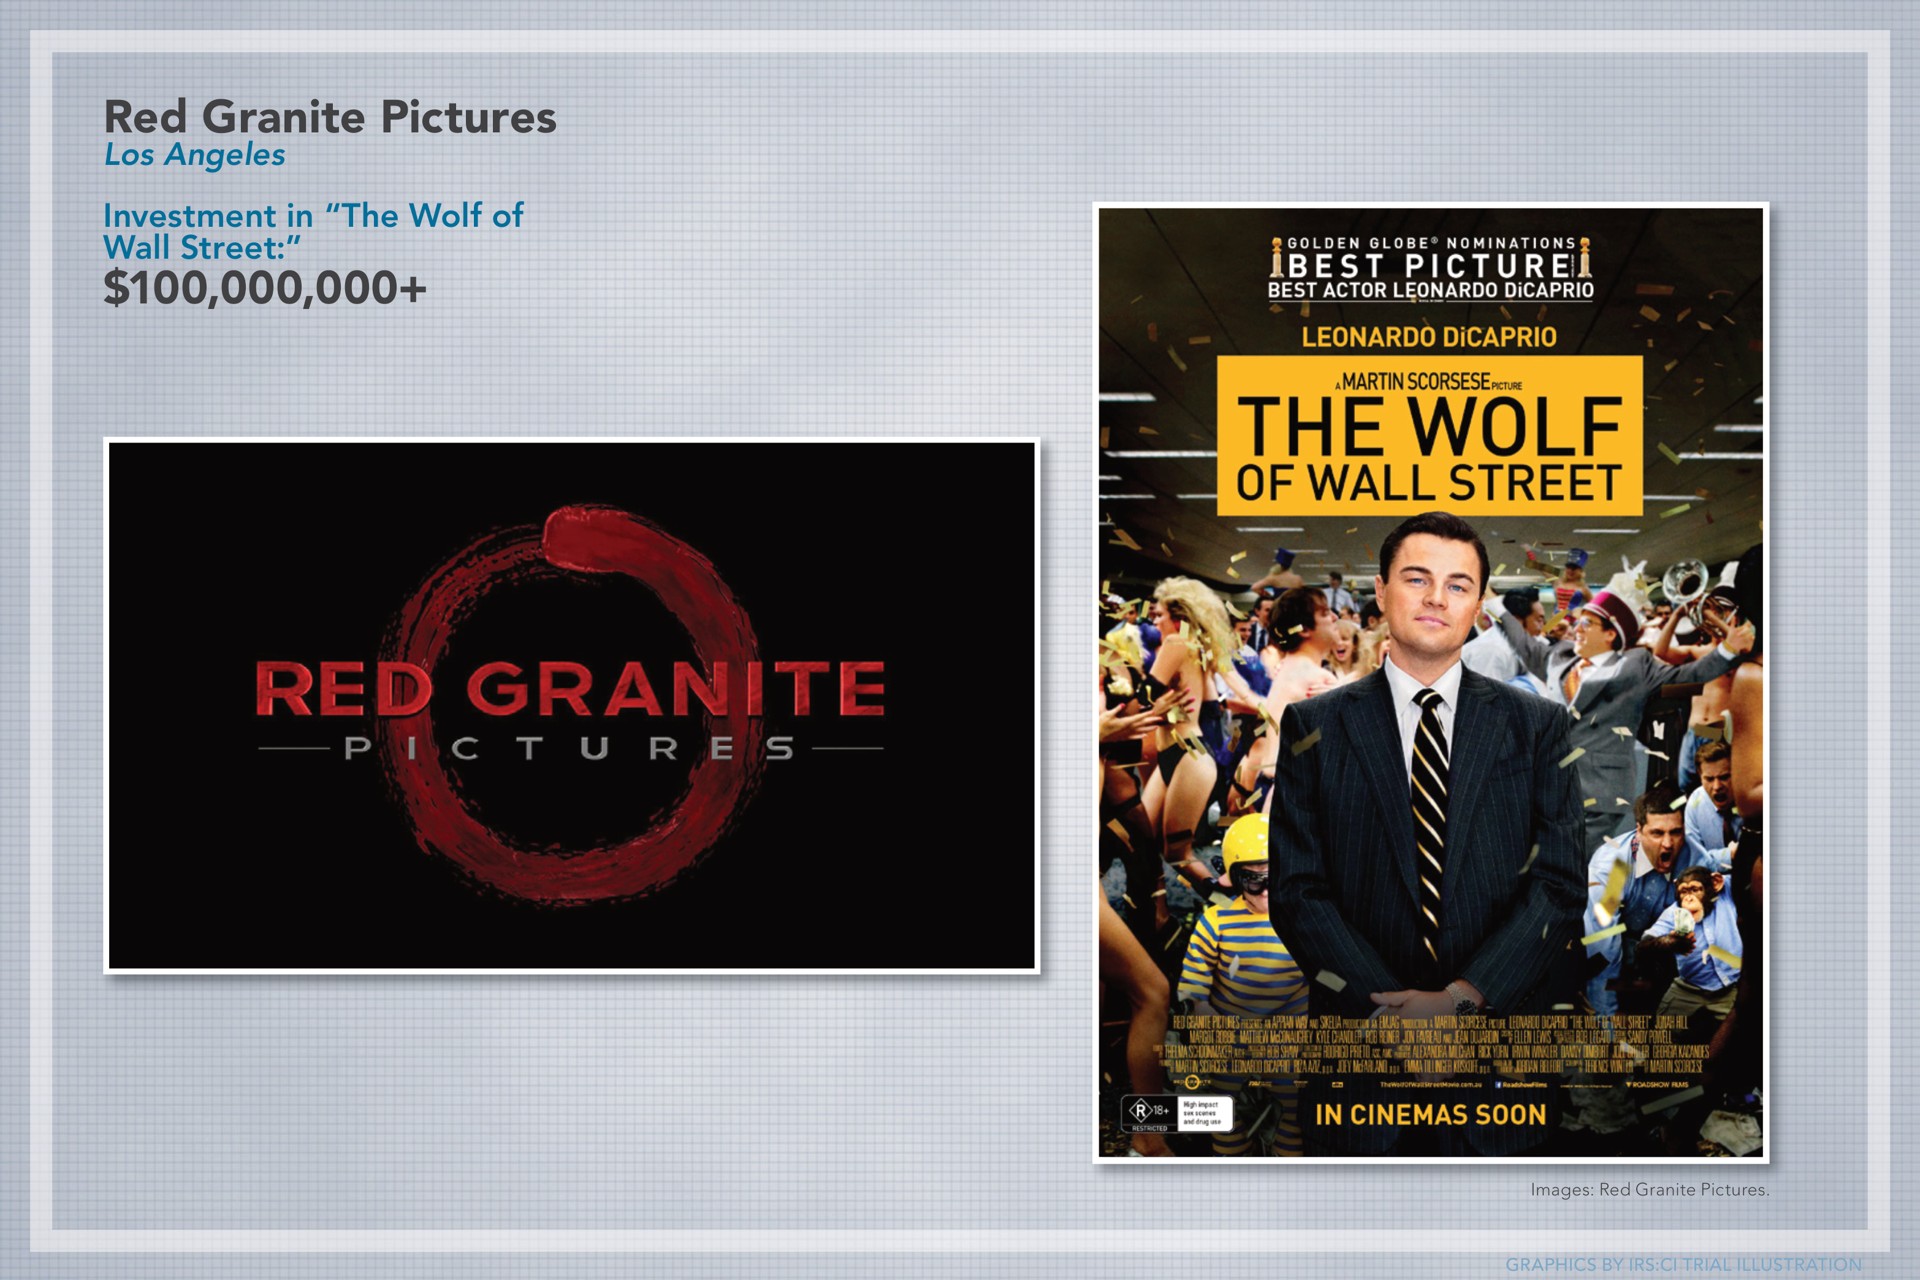 red granite pictures investment in the wolf of wall street images red granite pictures | 1MDB